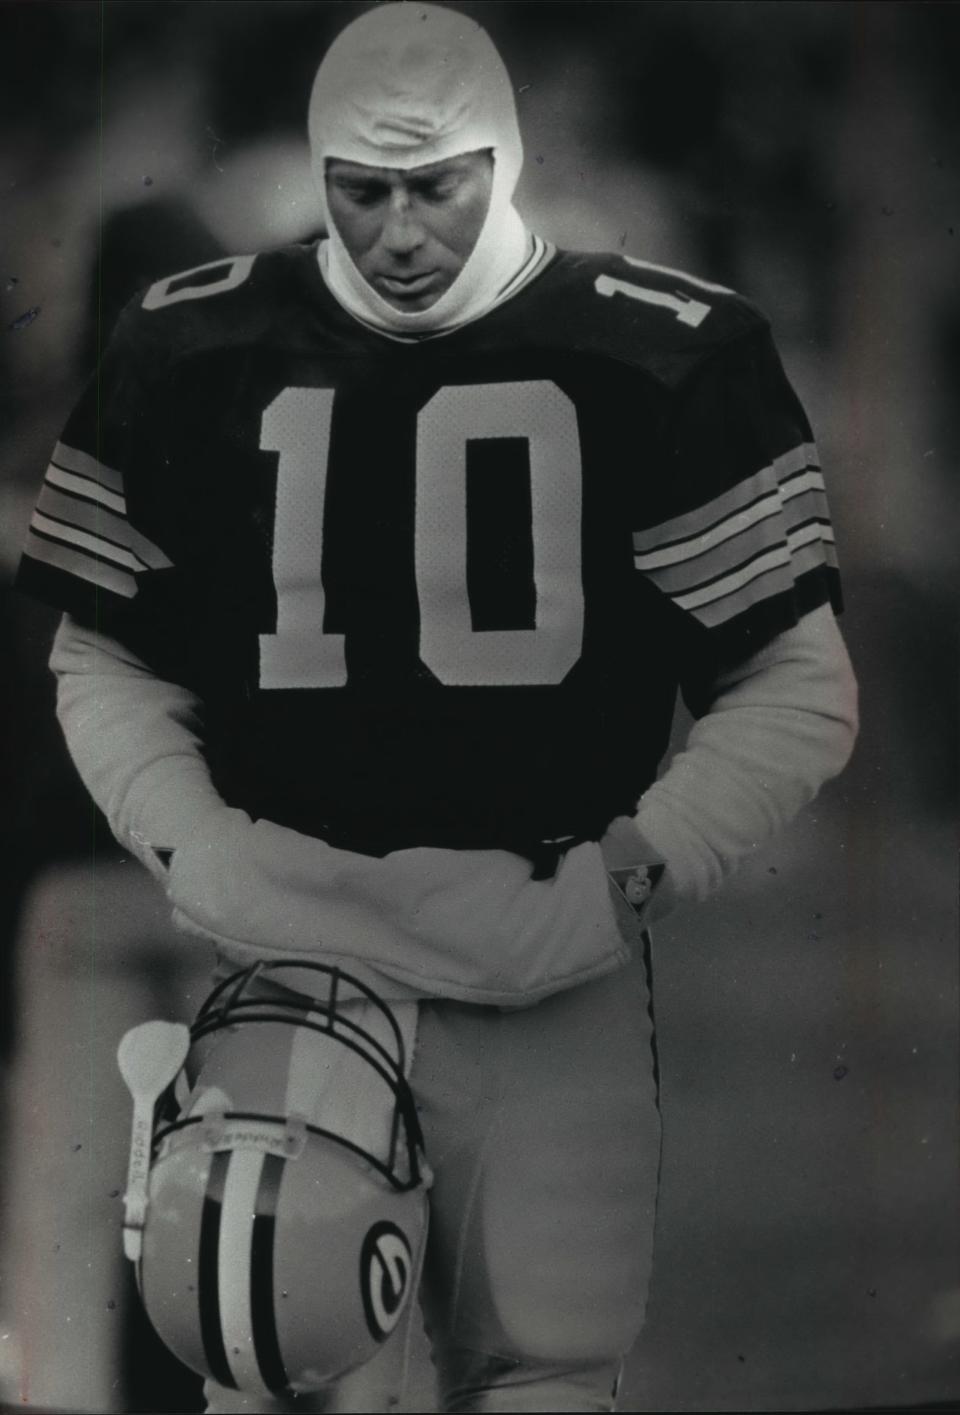 Blair Kiel leaves the field after throwing the interception that preserved Detroit's 24-17 victory in 1990.